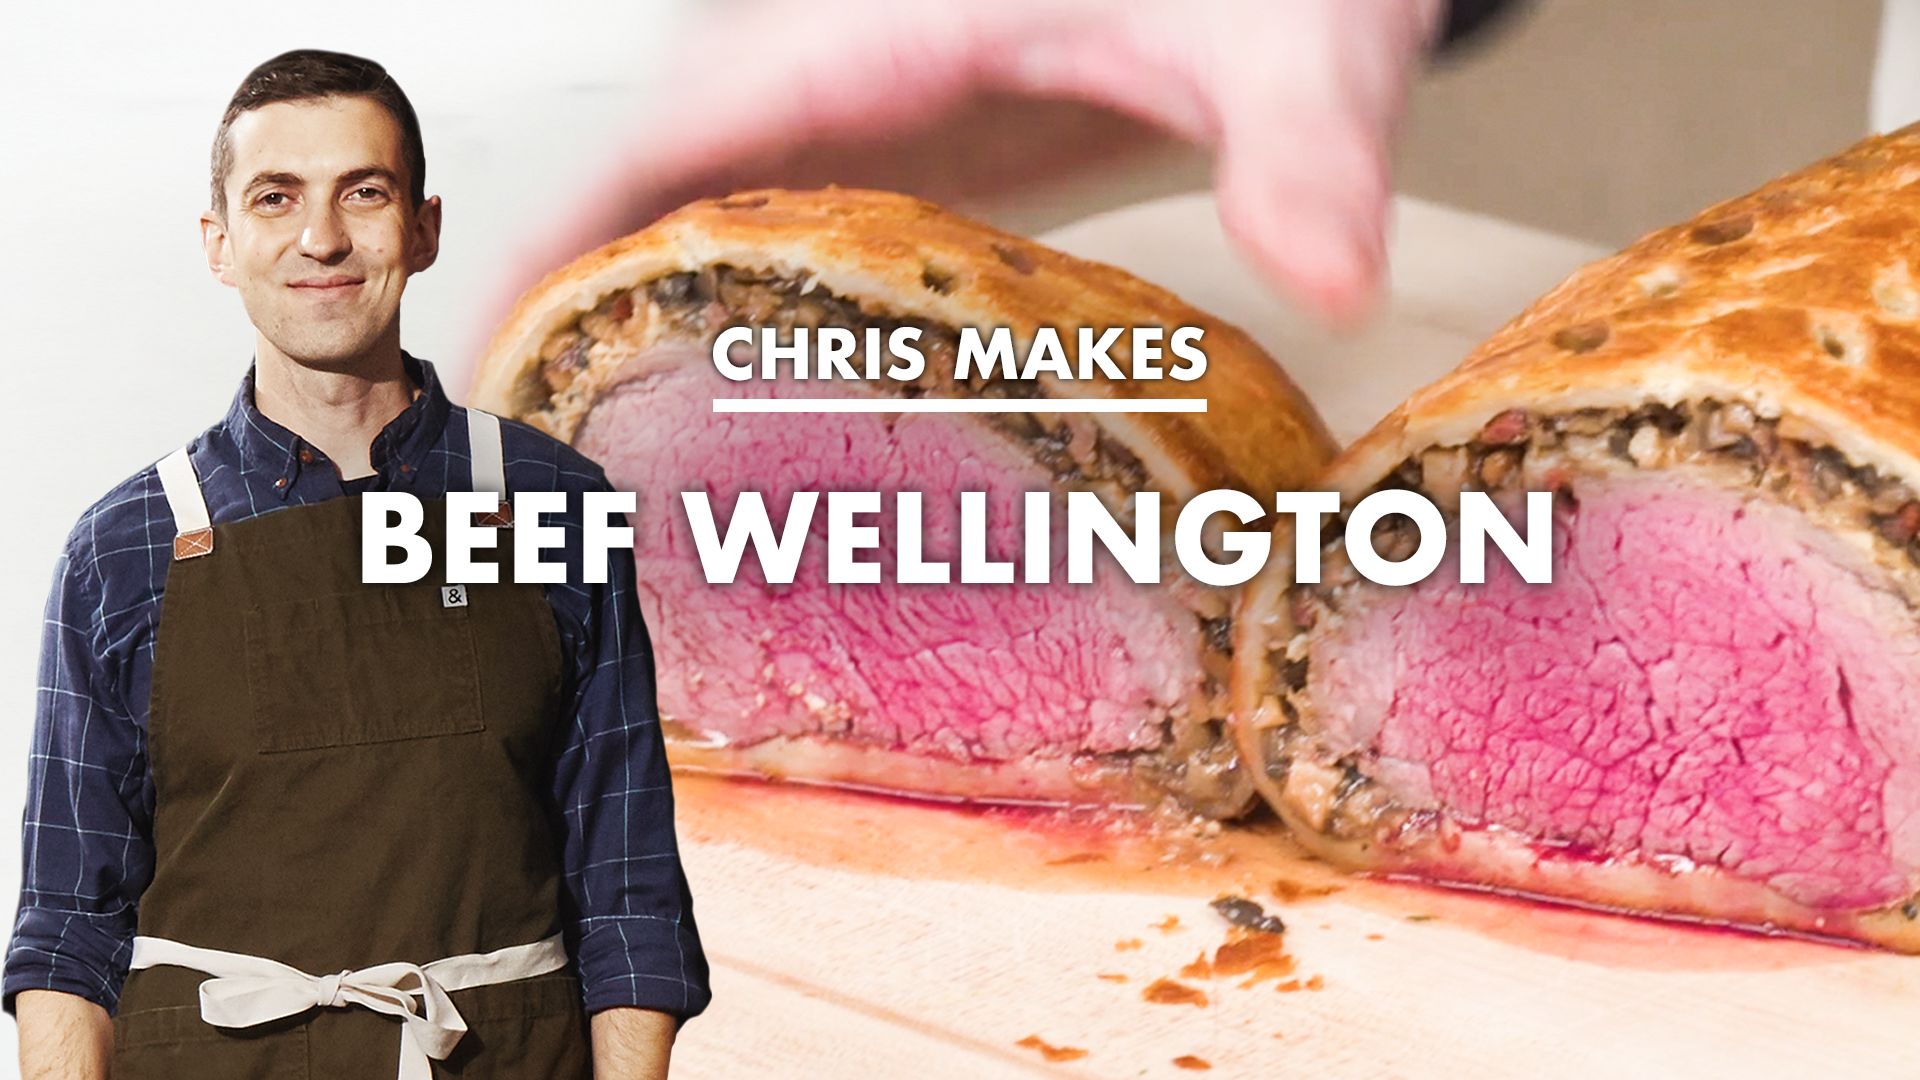 Watch Chris Makes Beef Wellington | From the Home Kitchen | Bon Appétit